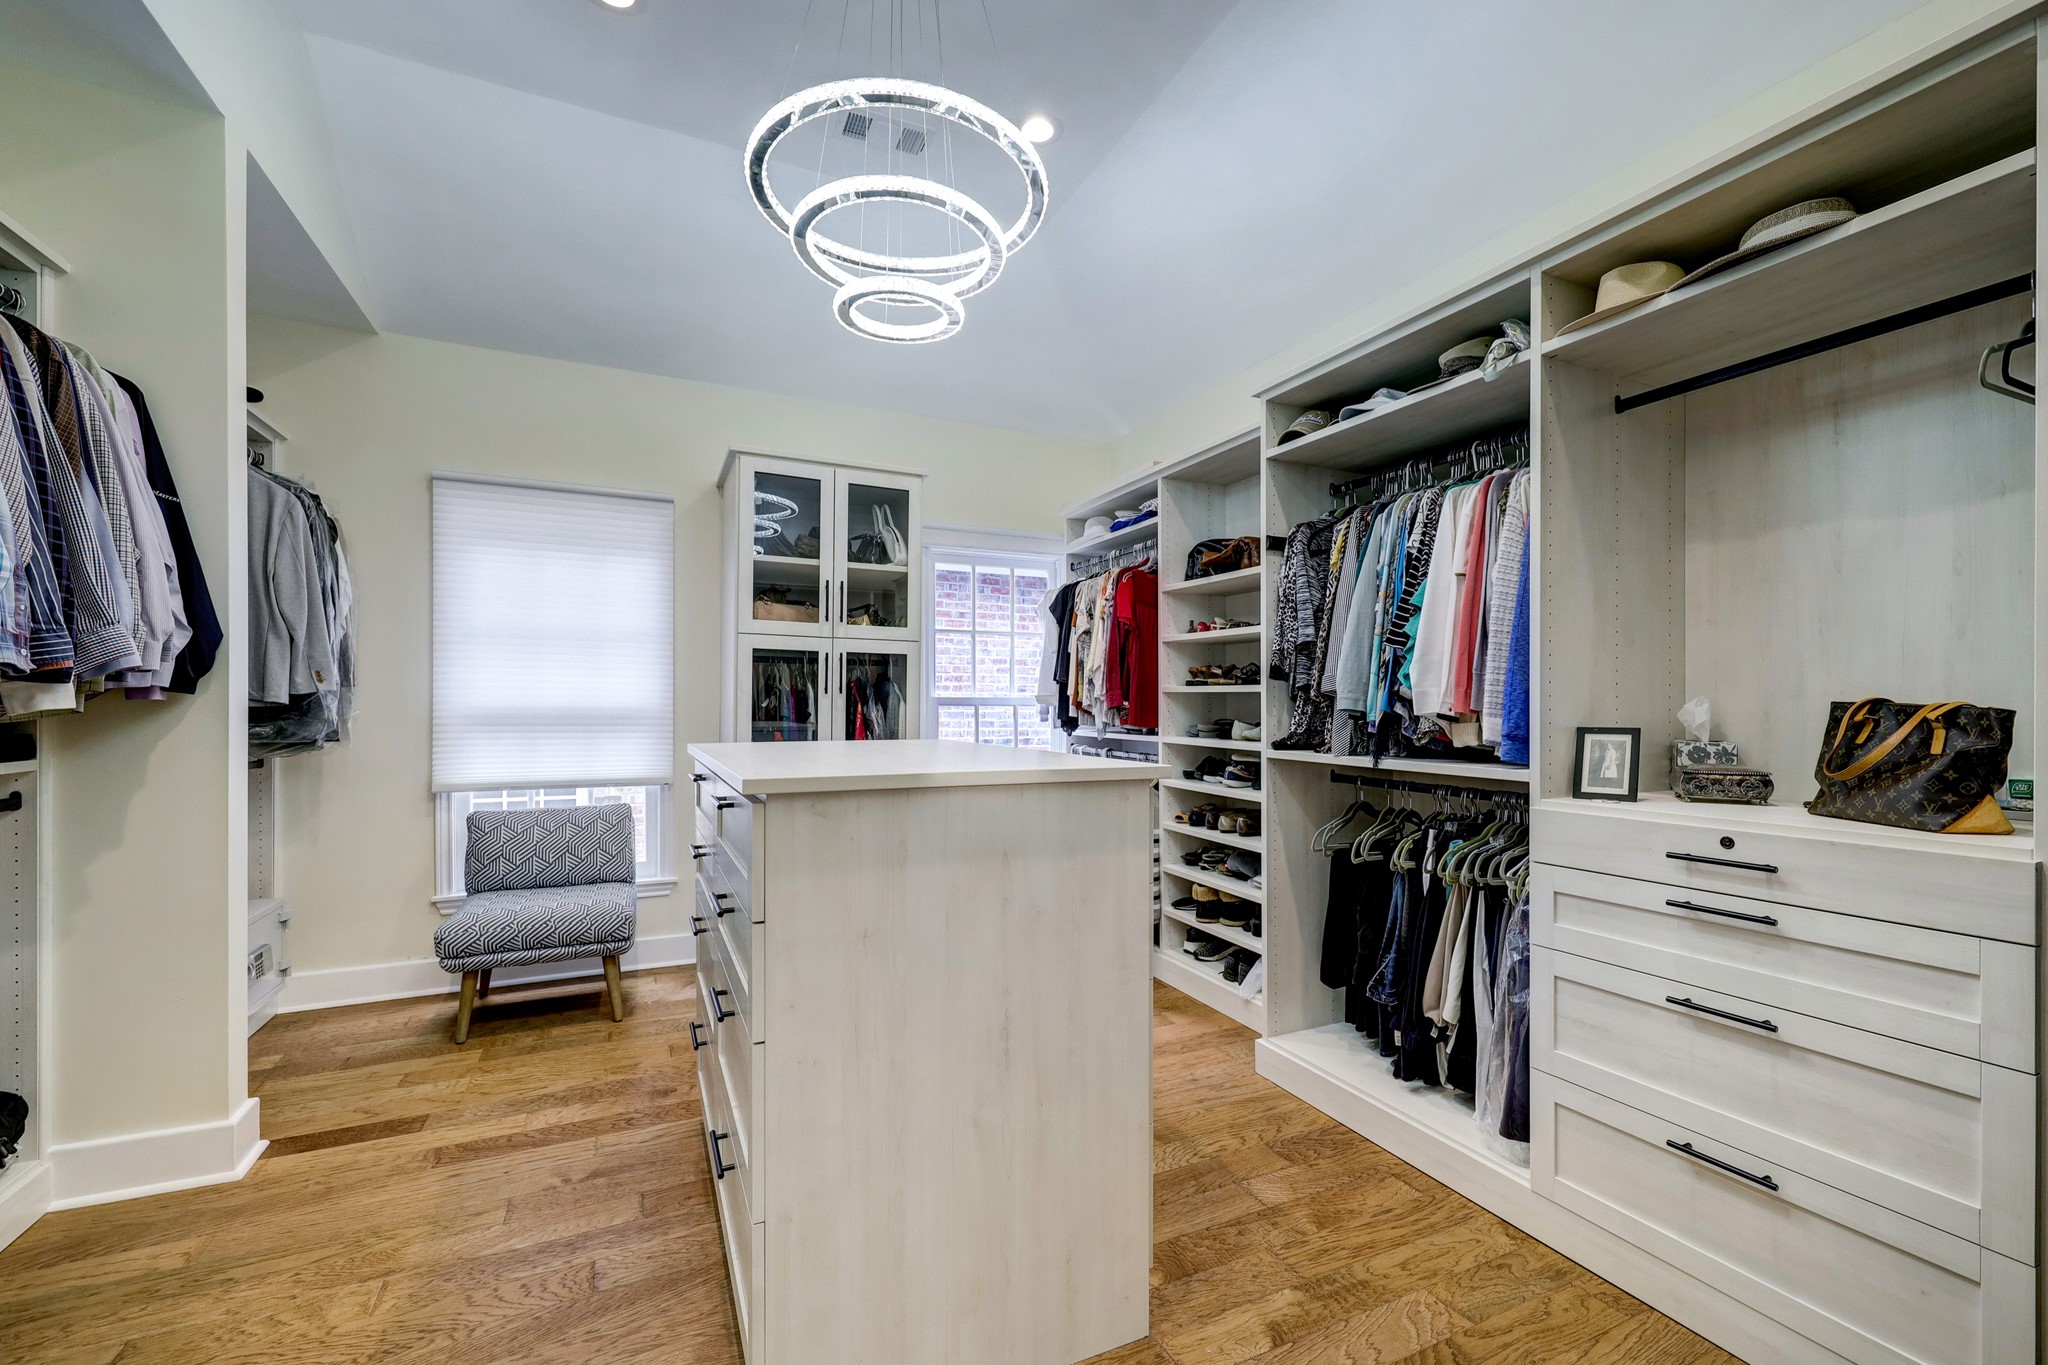 When the home was remodeled, the primary closet was expanded. Working with Container Store, the homeowners maximized every space.